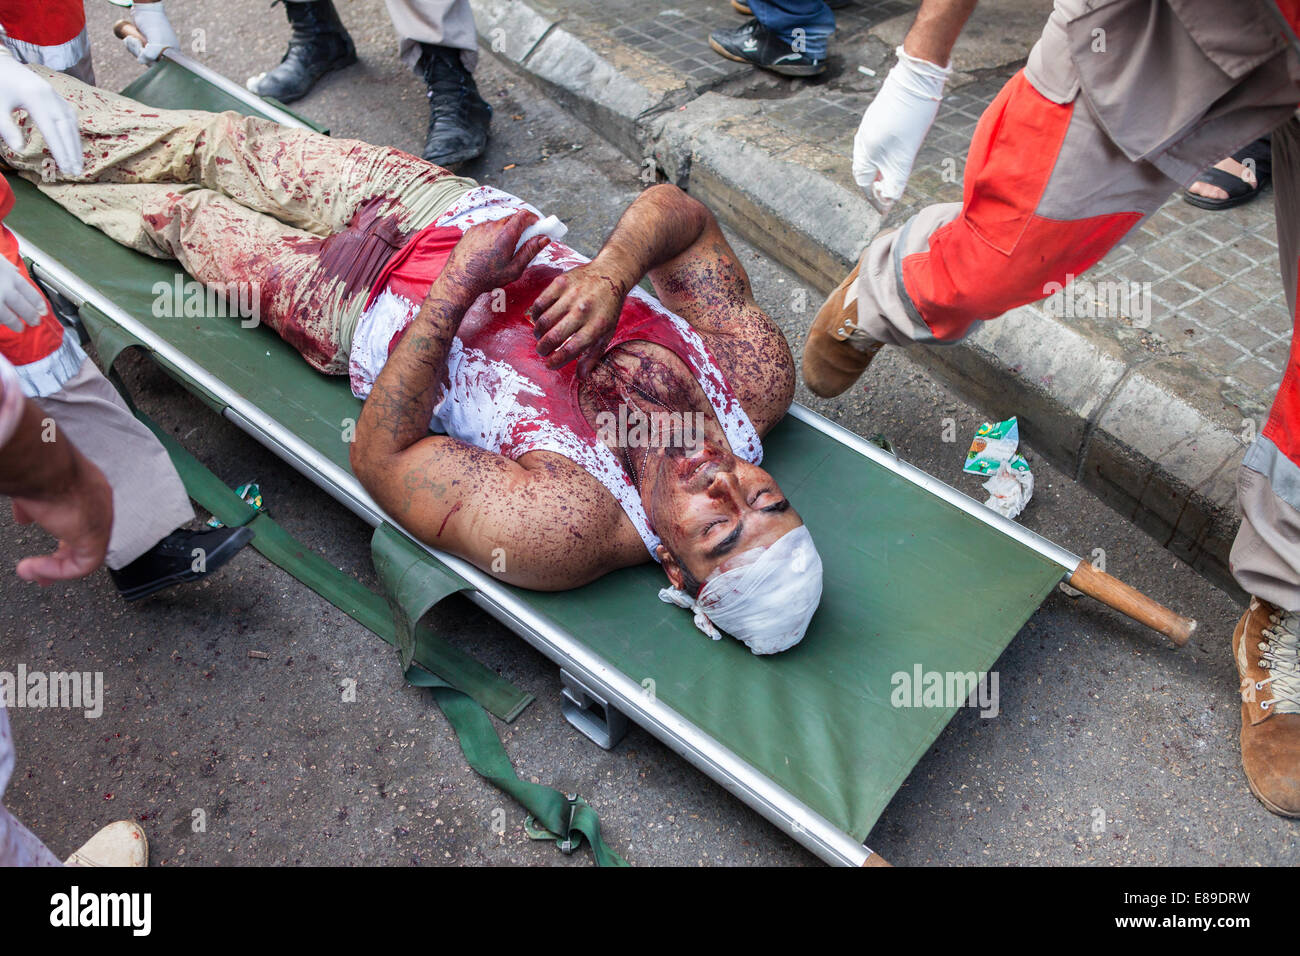 Shiite Muslim man, covered in his own blood, receiving medical attention after fainting, on Ashura Day in Nabatieh, Lebanon. Stock Photo